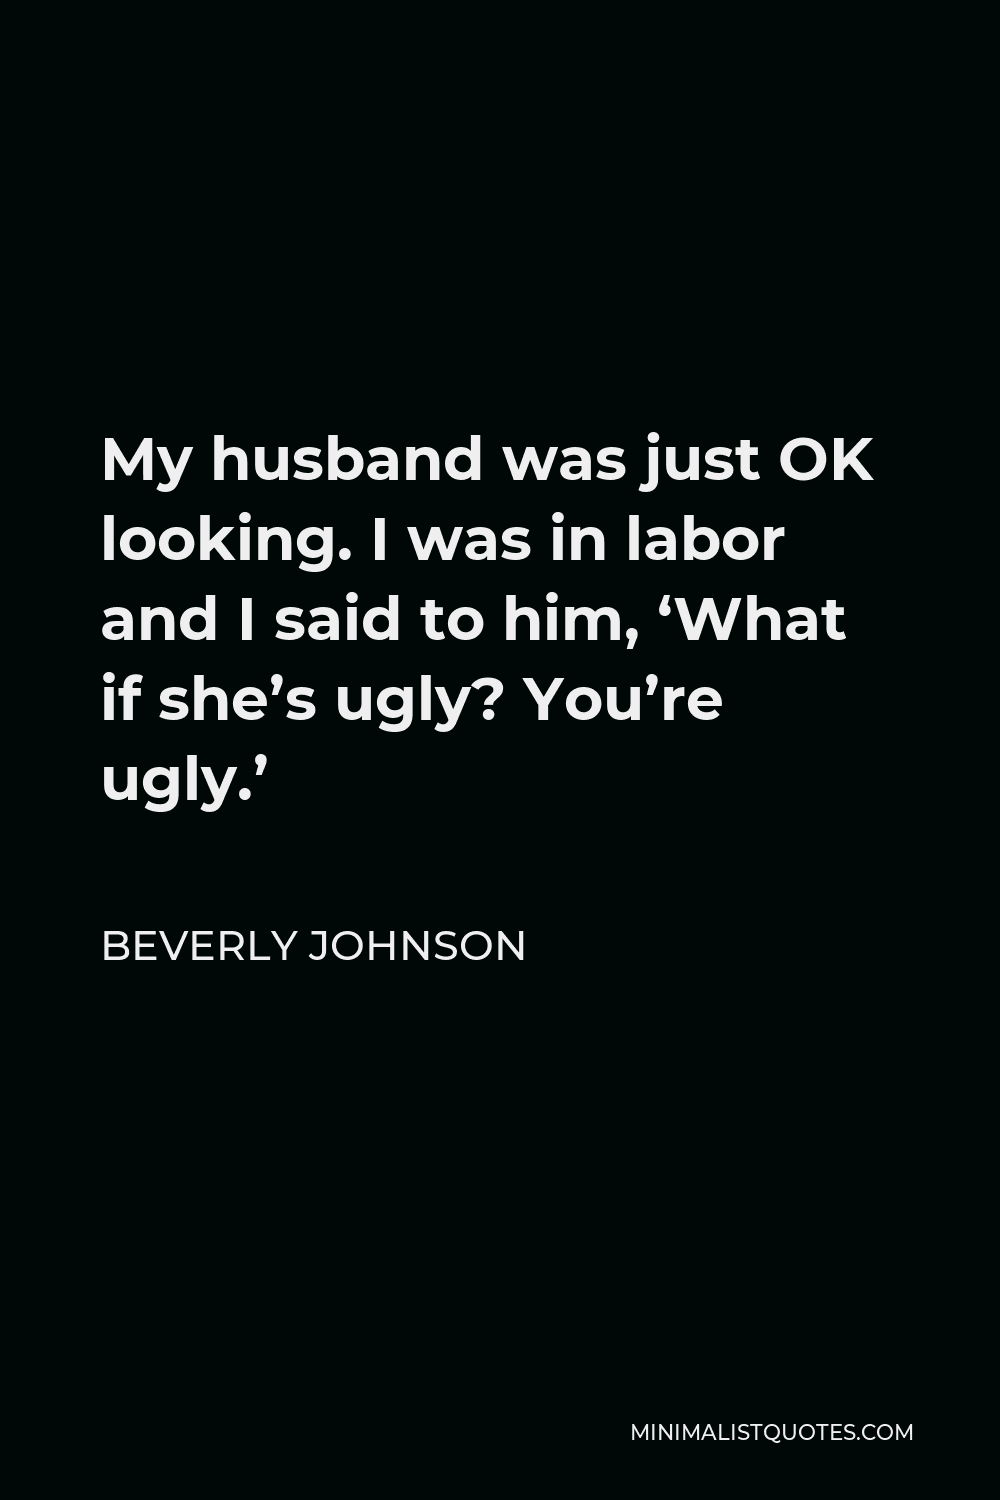 Beverly Johnson Quote - My husband was just OK looking. I was in labor and I said to him, ‘What if she’s ugly? You’re ugly.’